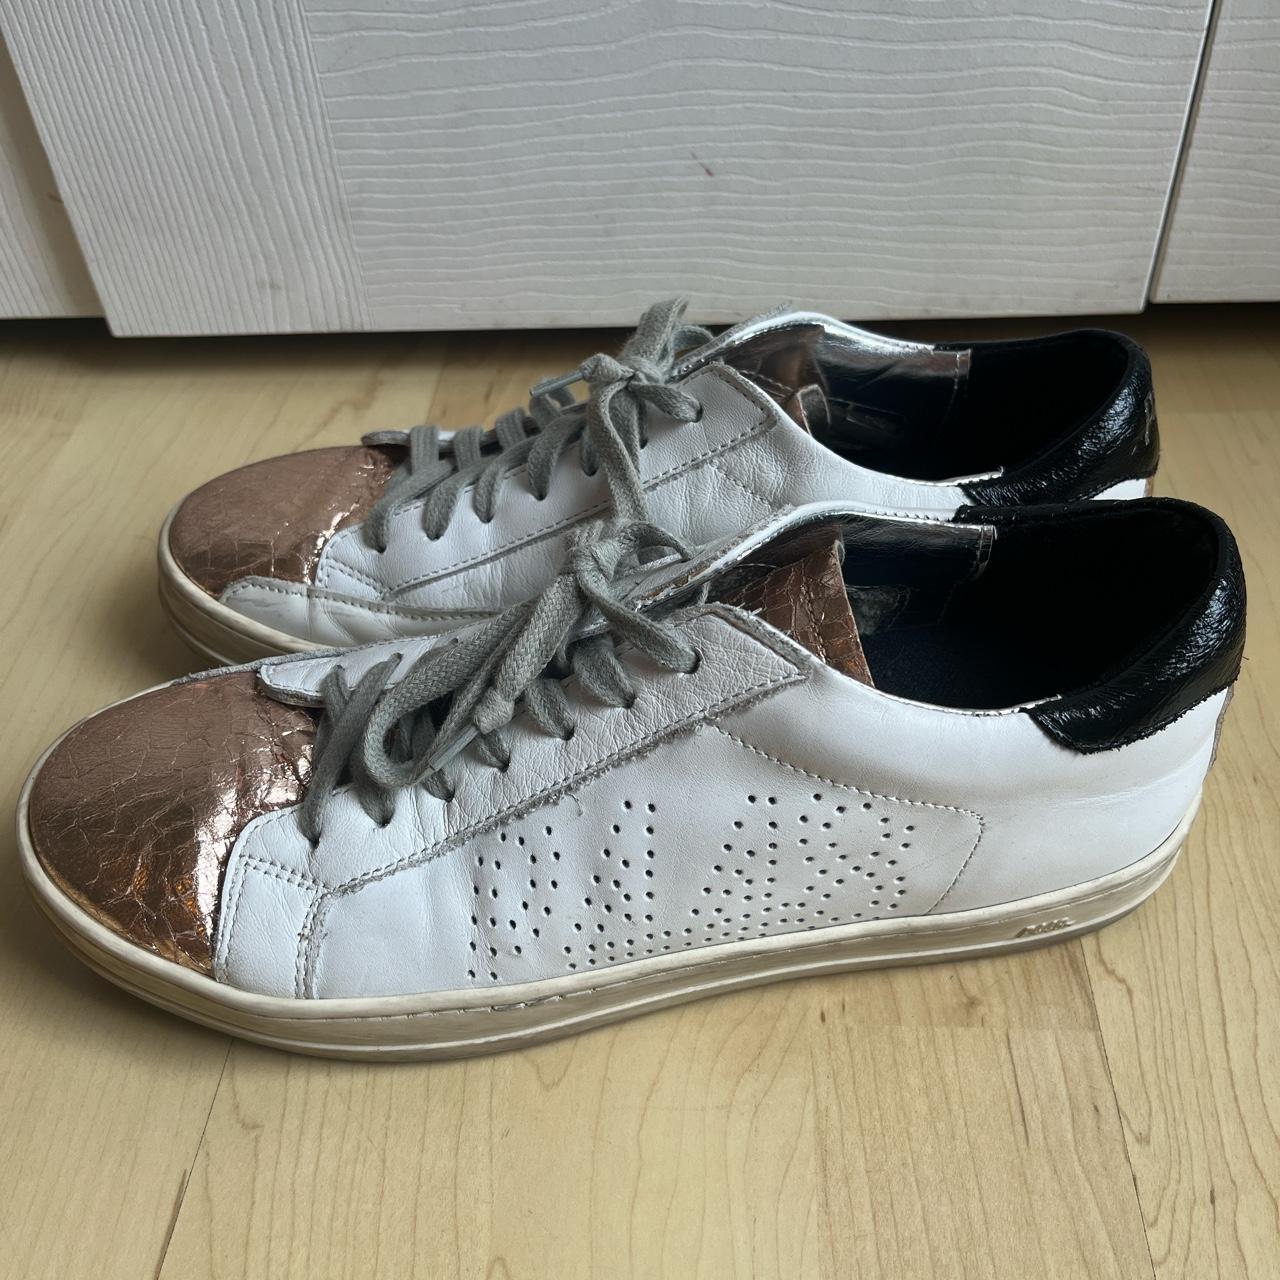 P448 Rose Gold Sneakers Size US8/EU39! I bought... - Depop